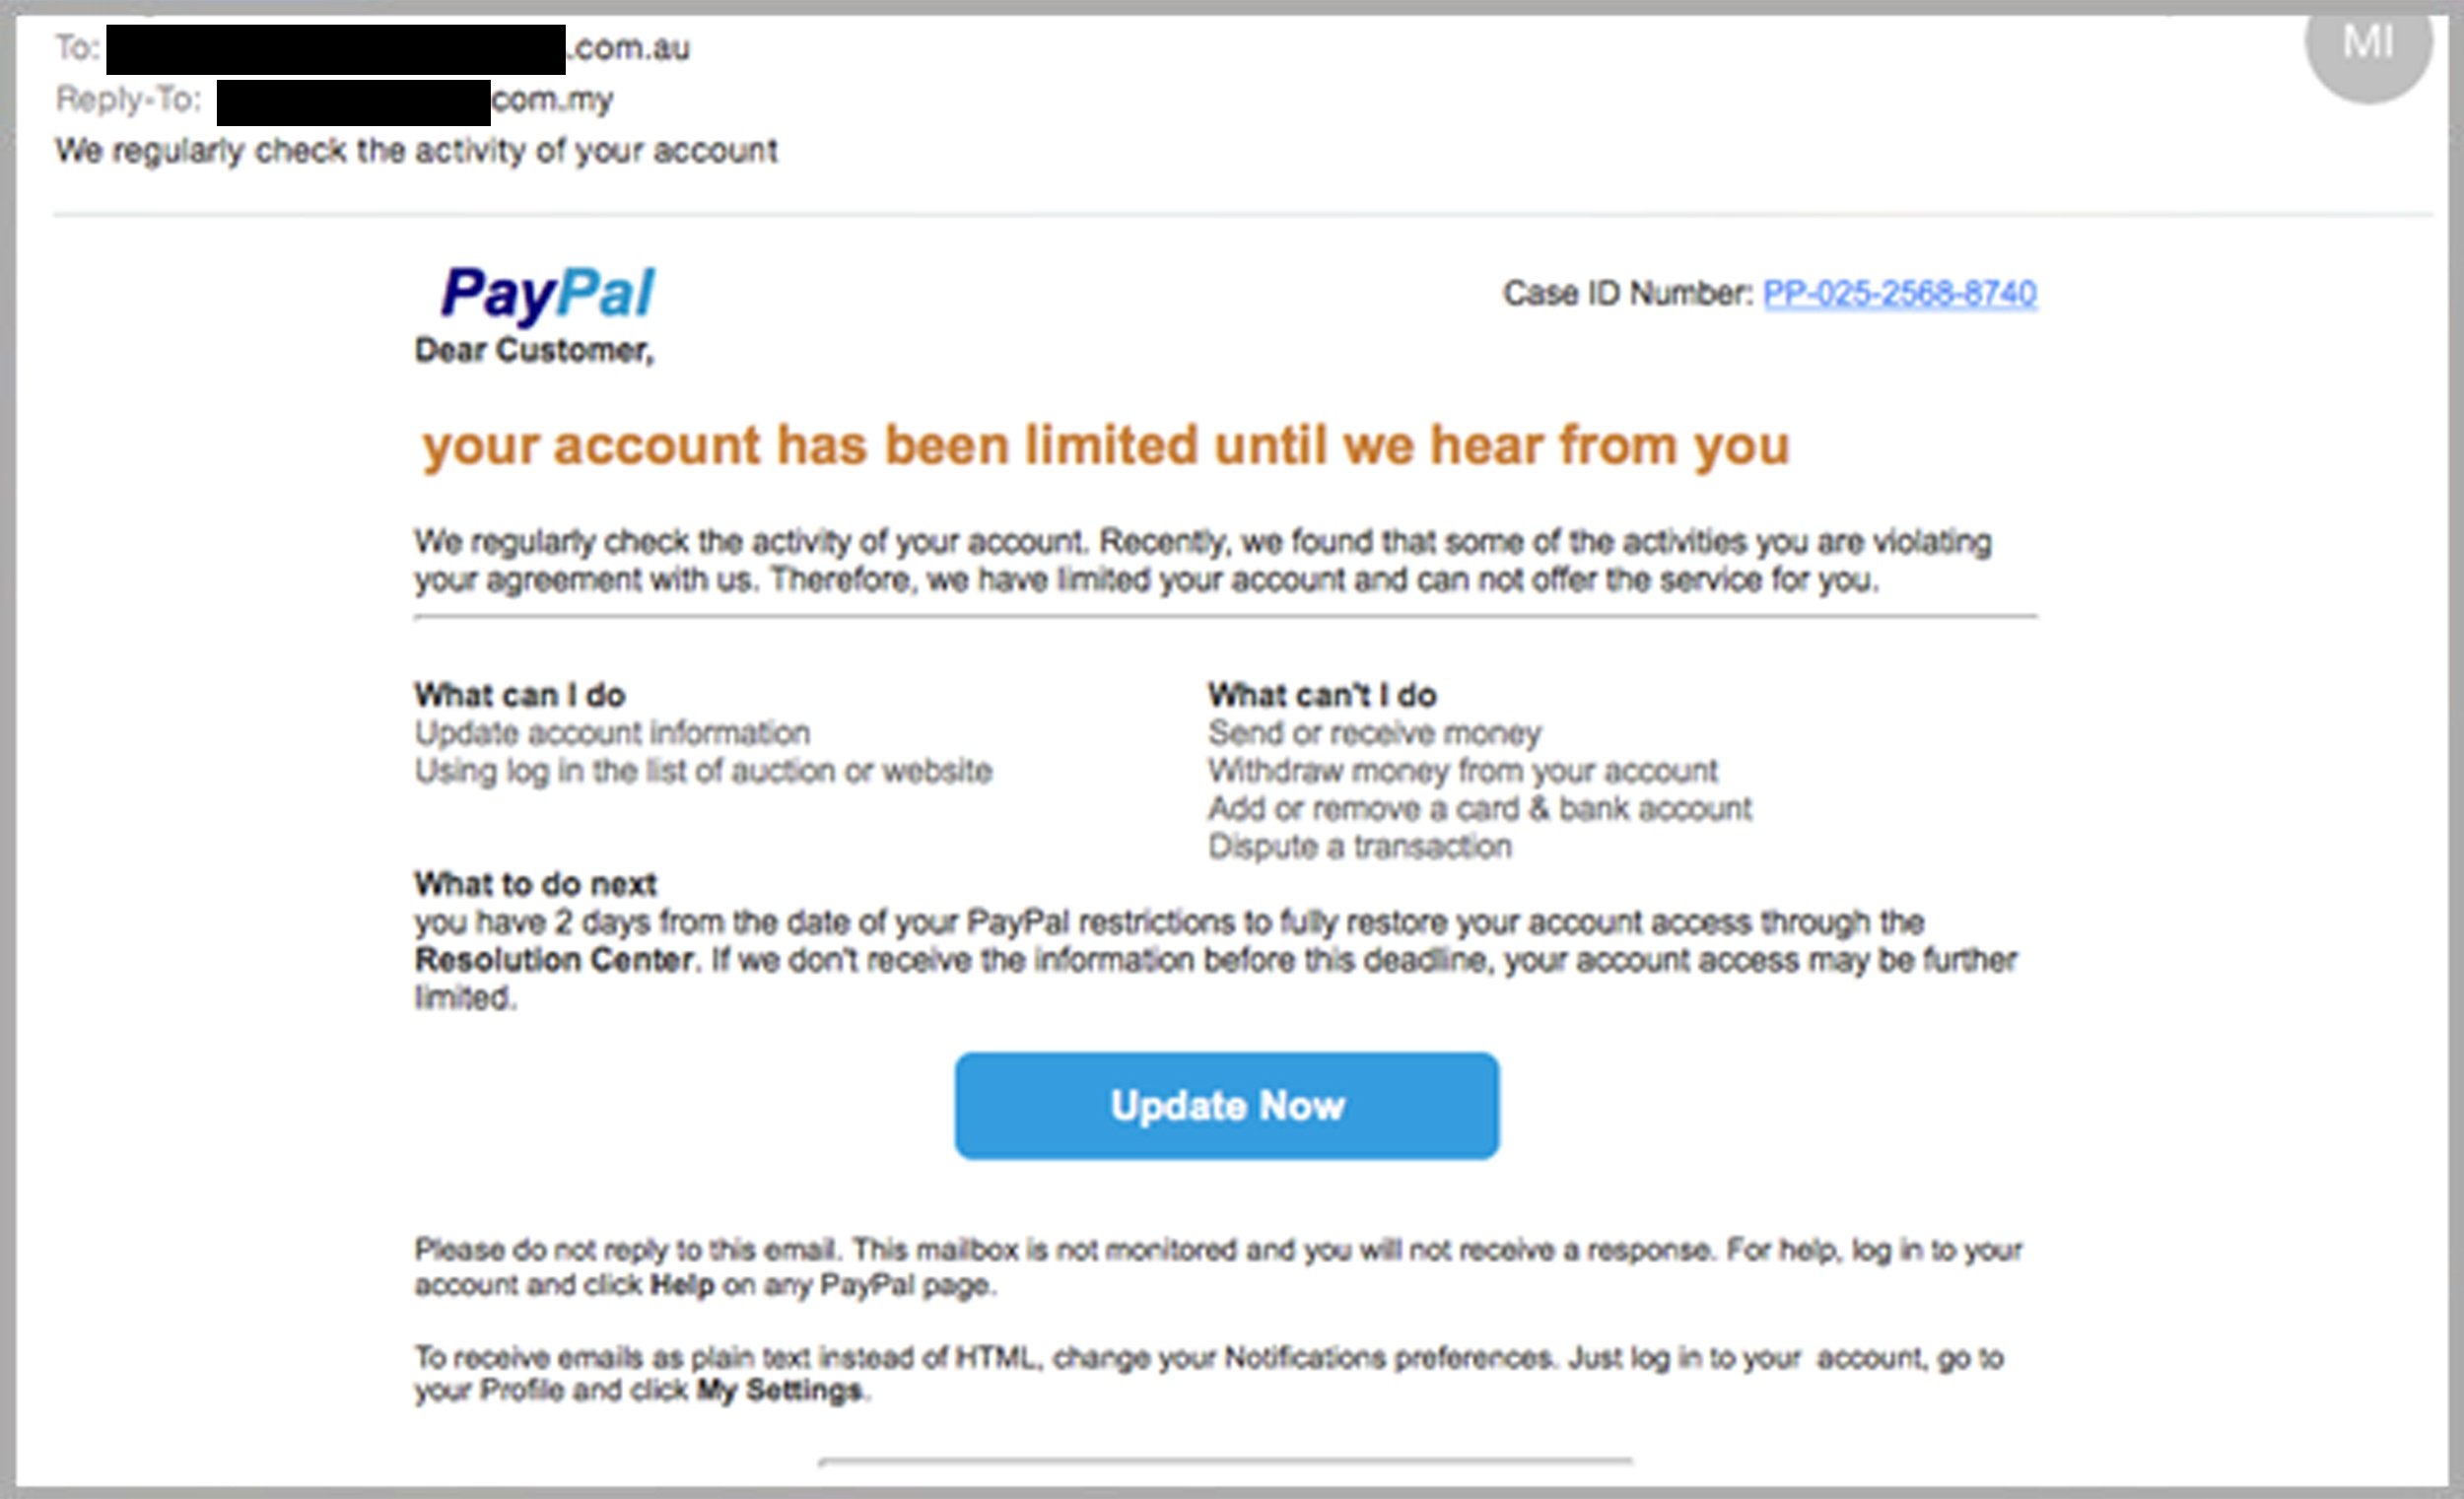 MailGuard_Pay_Pal_Phishing_Email_Scam_Email_Sample-1.jpg